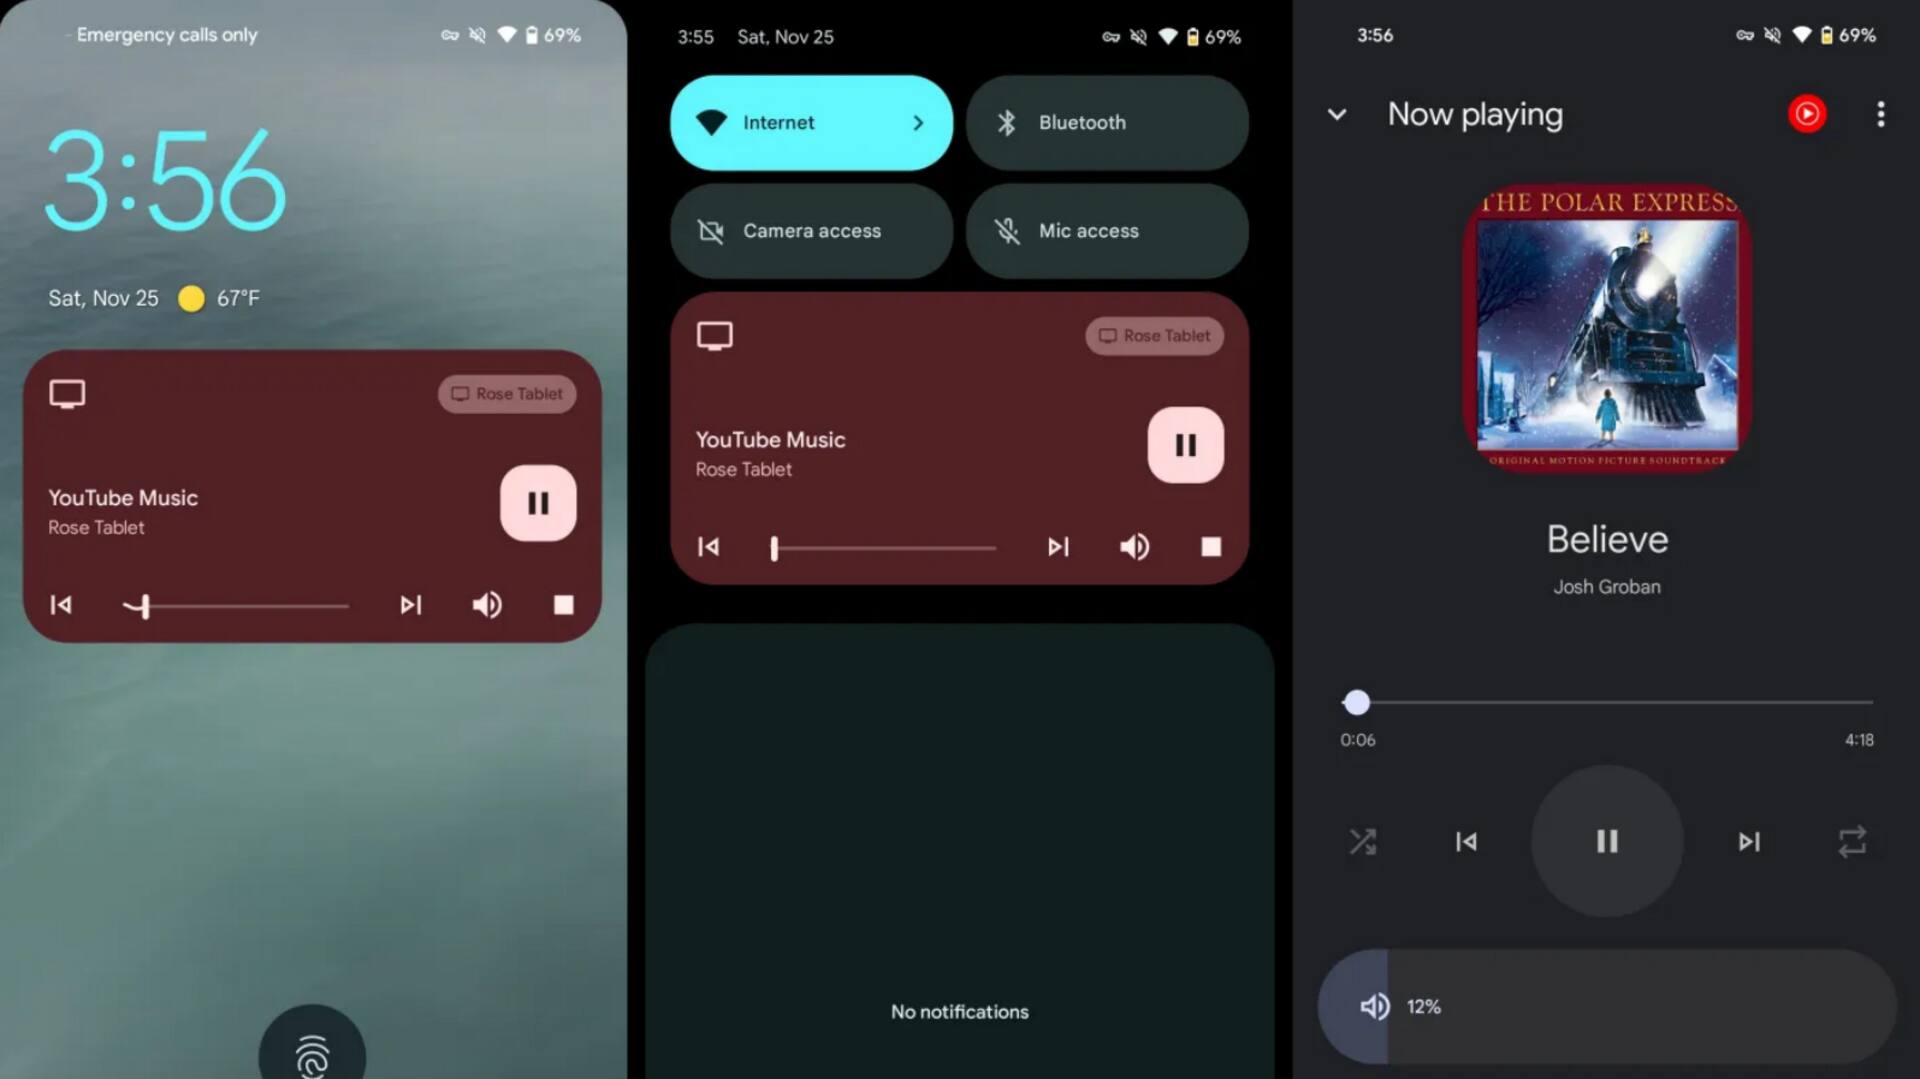 Google Cast control notifications integrated into Android media player